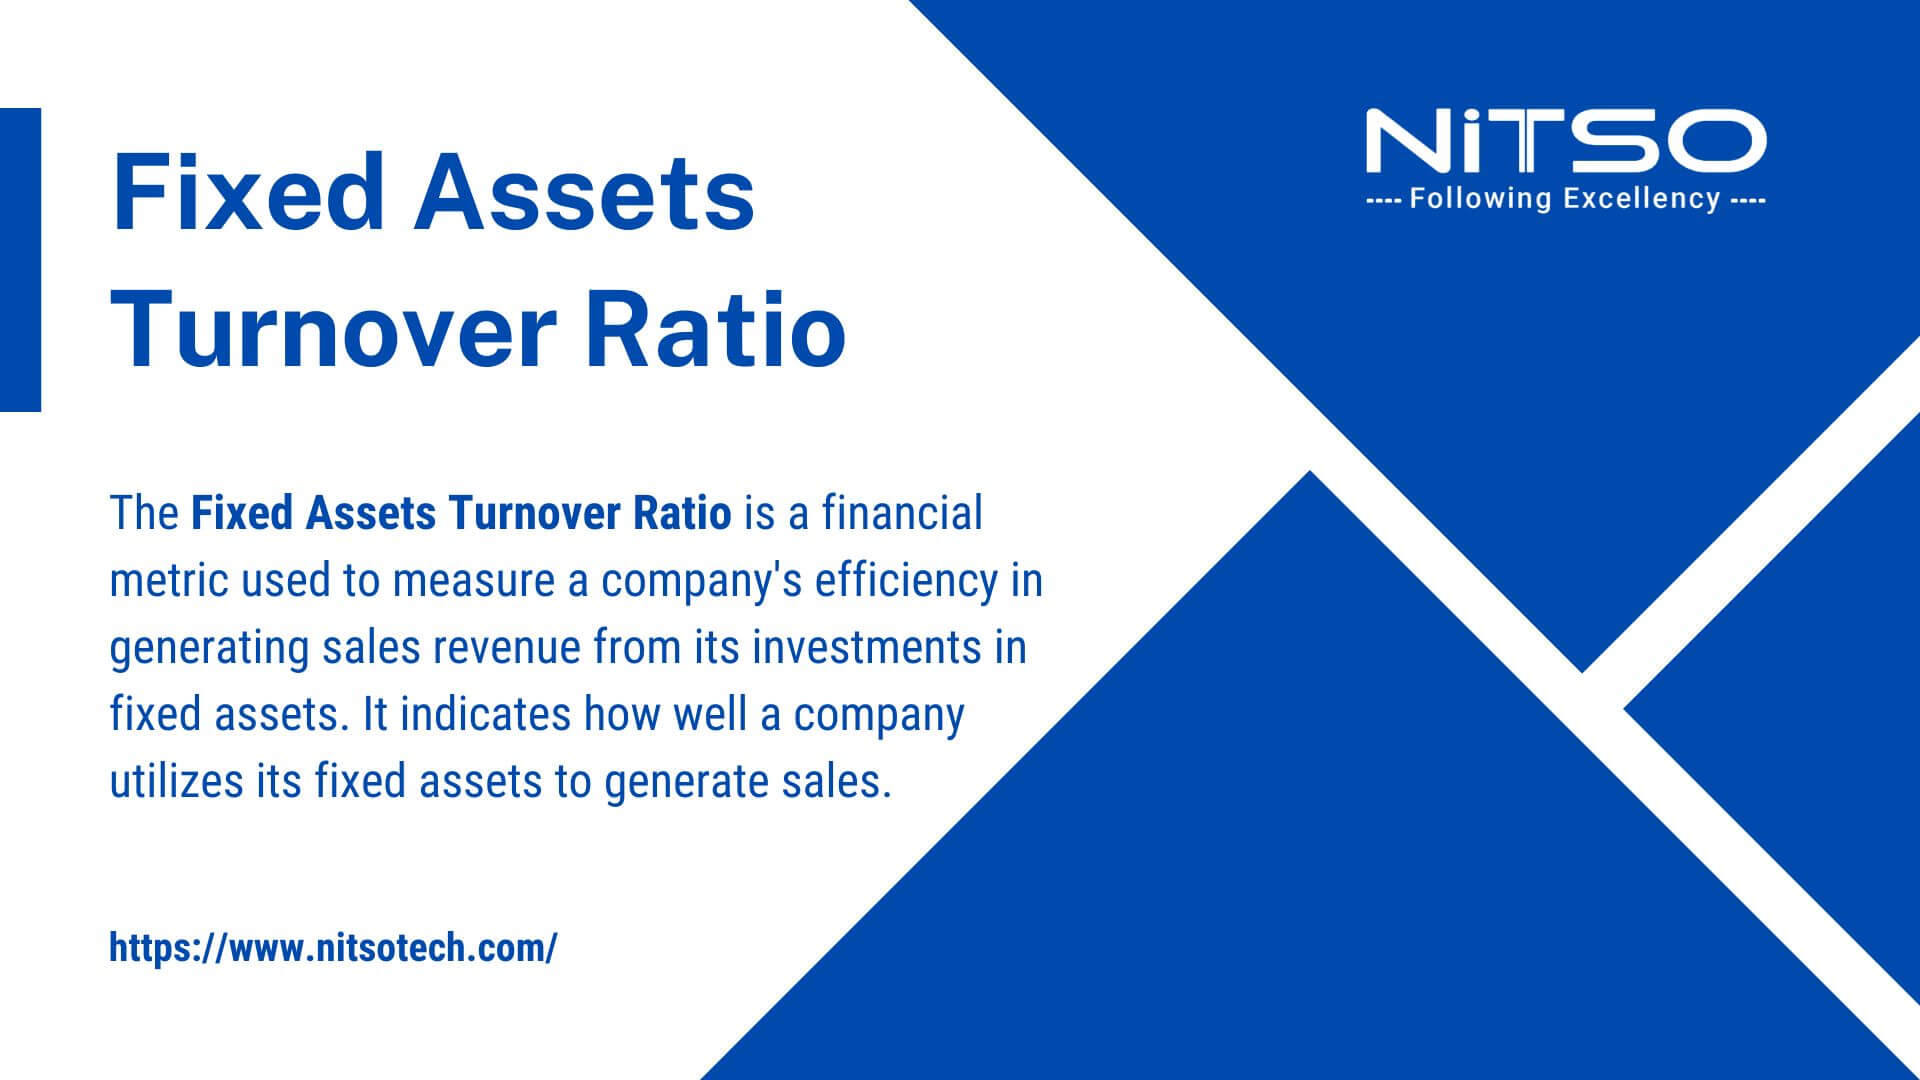 Fixed Assets Turnover Ratio